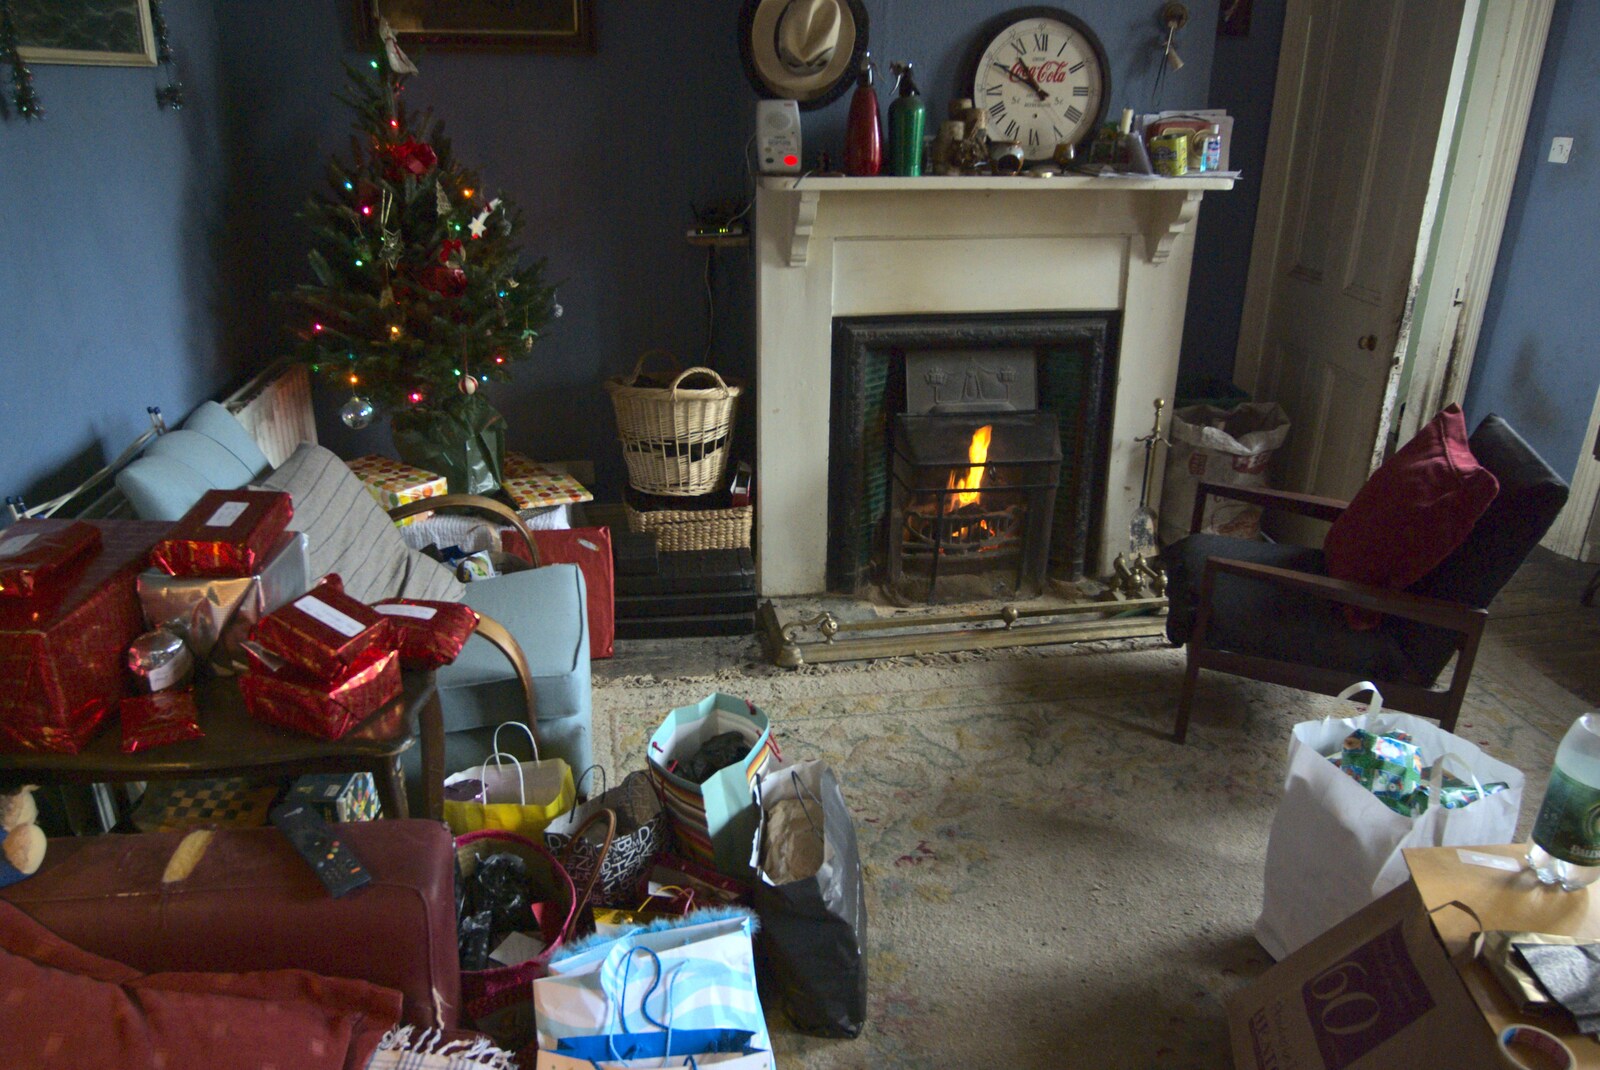 Number 19's front room from Christmas at Number 19, Blackrock, County Dublin, Ireland - 25th December 2009